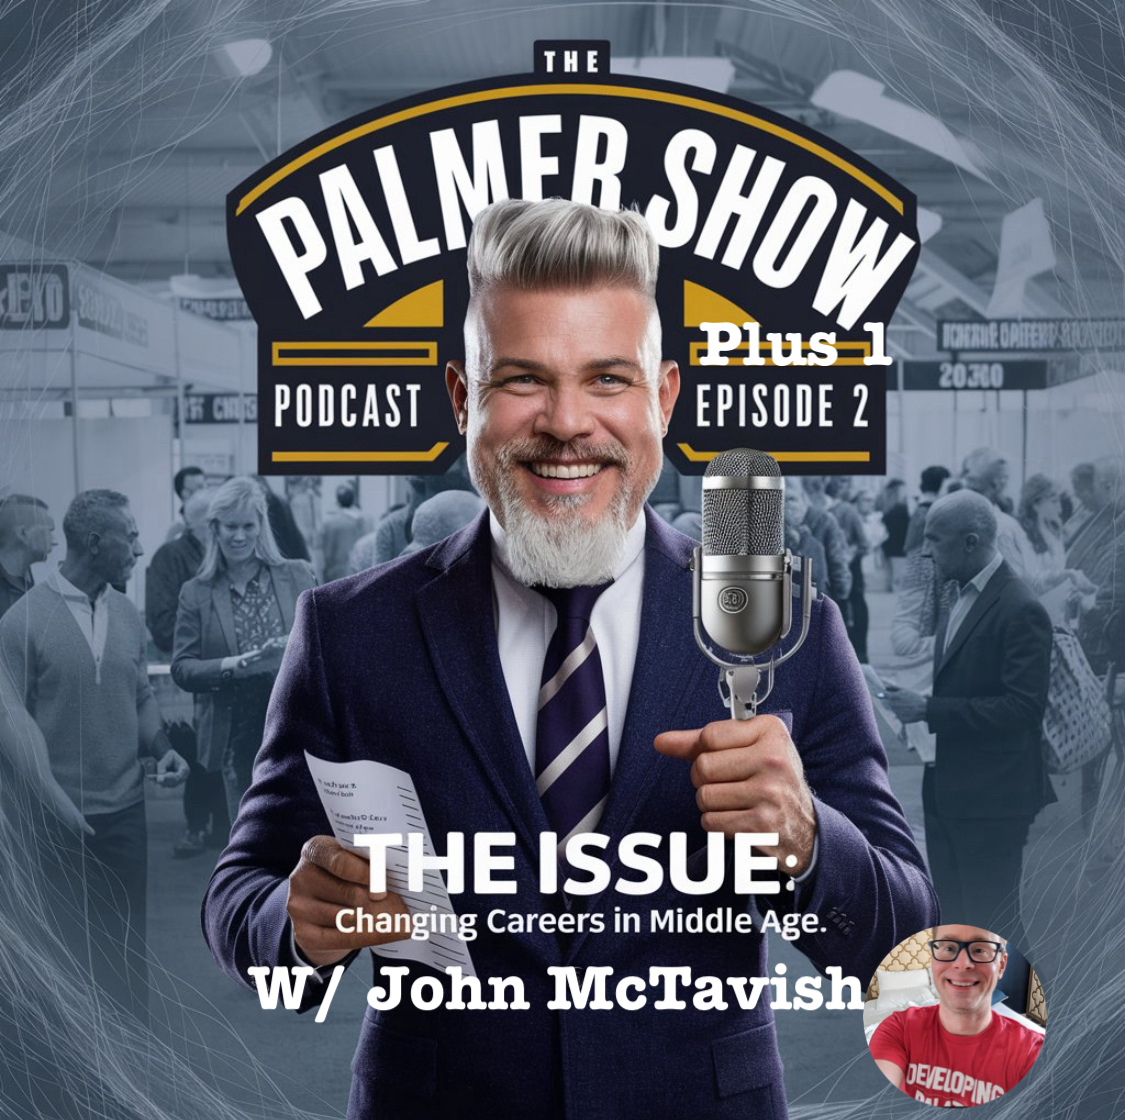 Episode 2 Transitioning to a New Career In Middle Age w/ John Mctavish